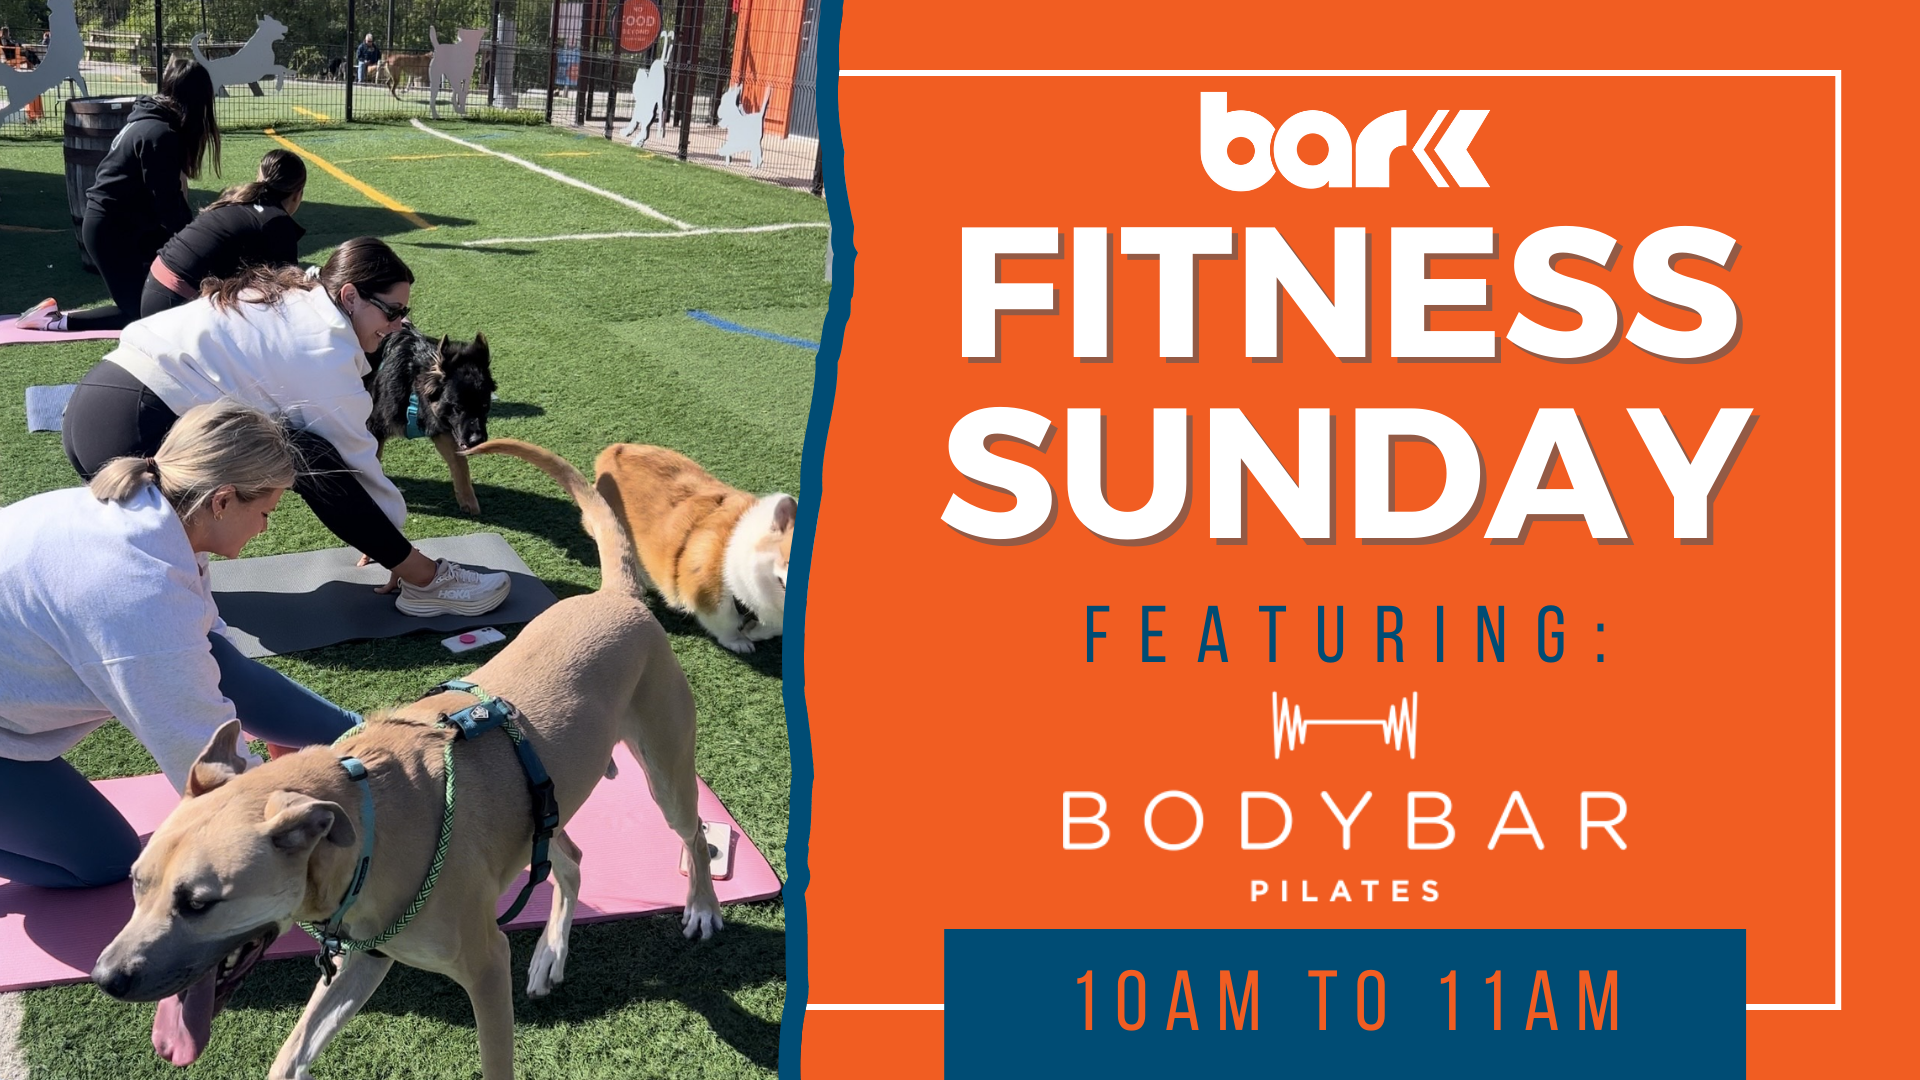 Women doing pilates surrounded by dogs. Text - Bar K Fitness Sunday Featuring Body Bar Pilates 10am to 11am.